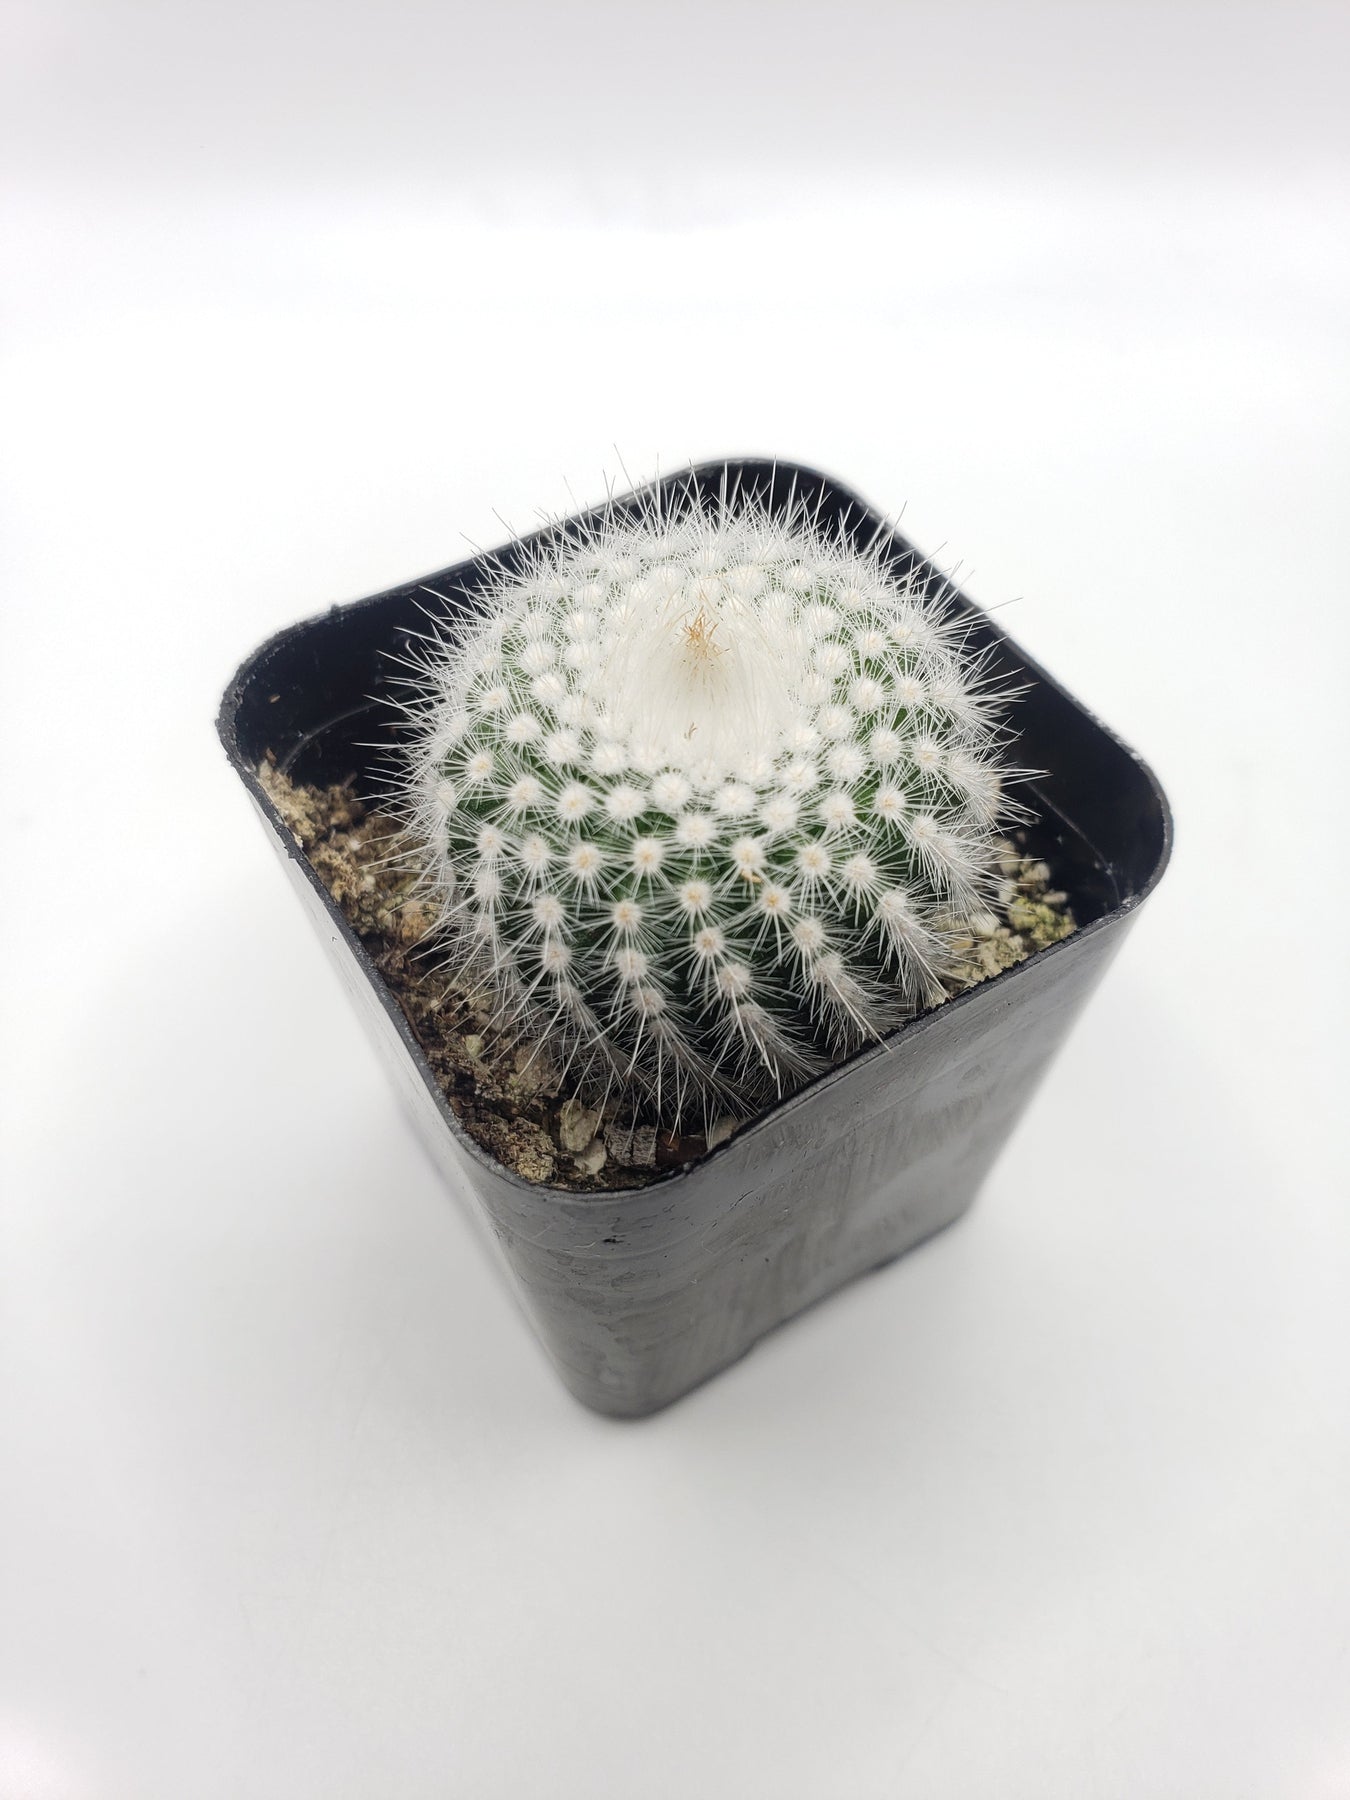 #8C Notocactus Silver Ball 2"-Cactus - Small - Exact Type-The Succulent Source